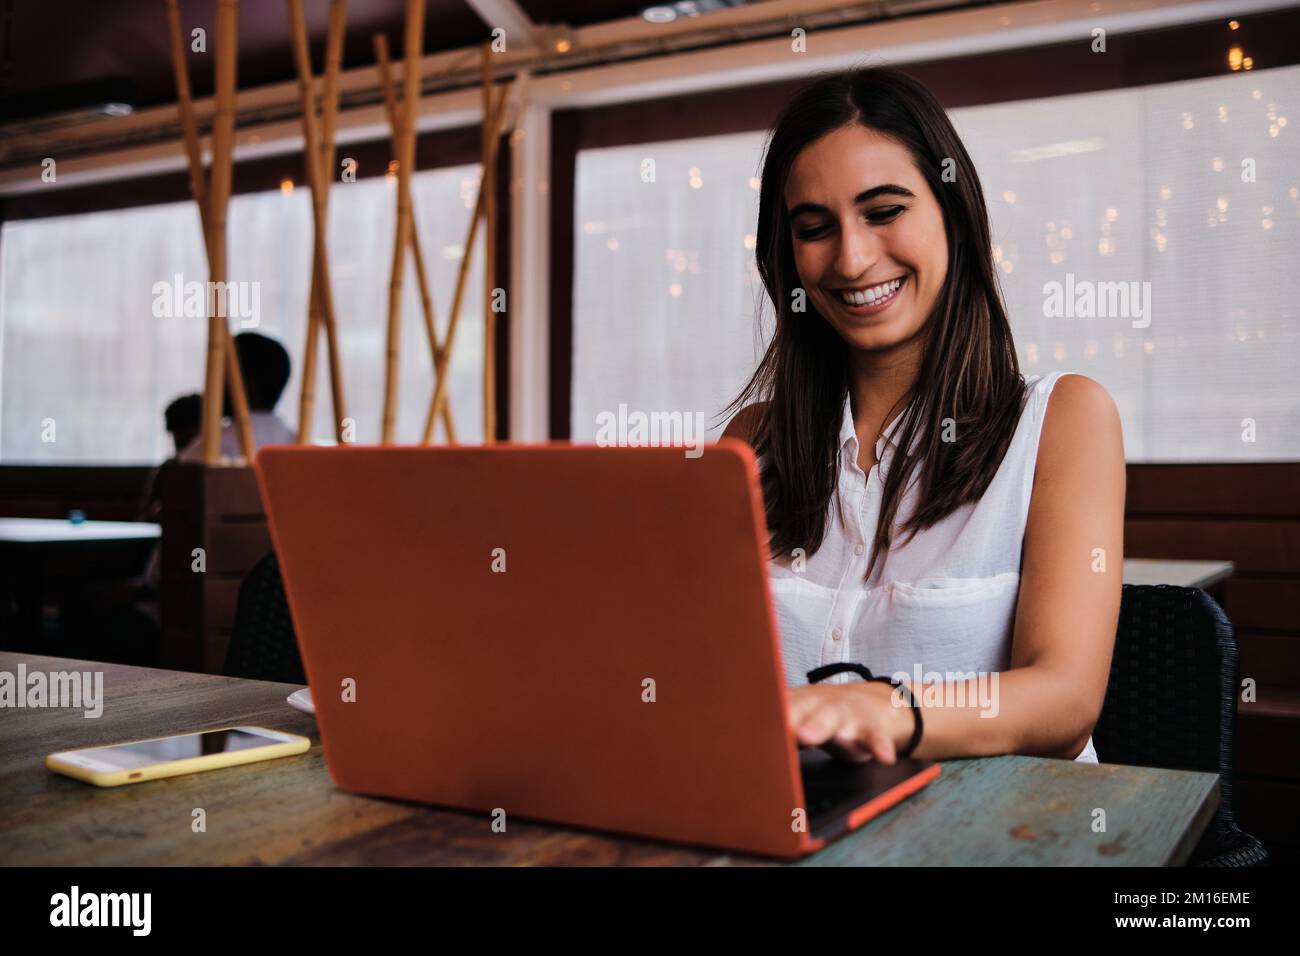 Smiley businesswoman working with a laptop in a cafeteria Stock Photo